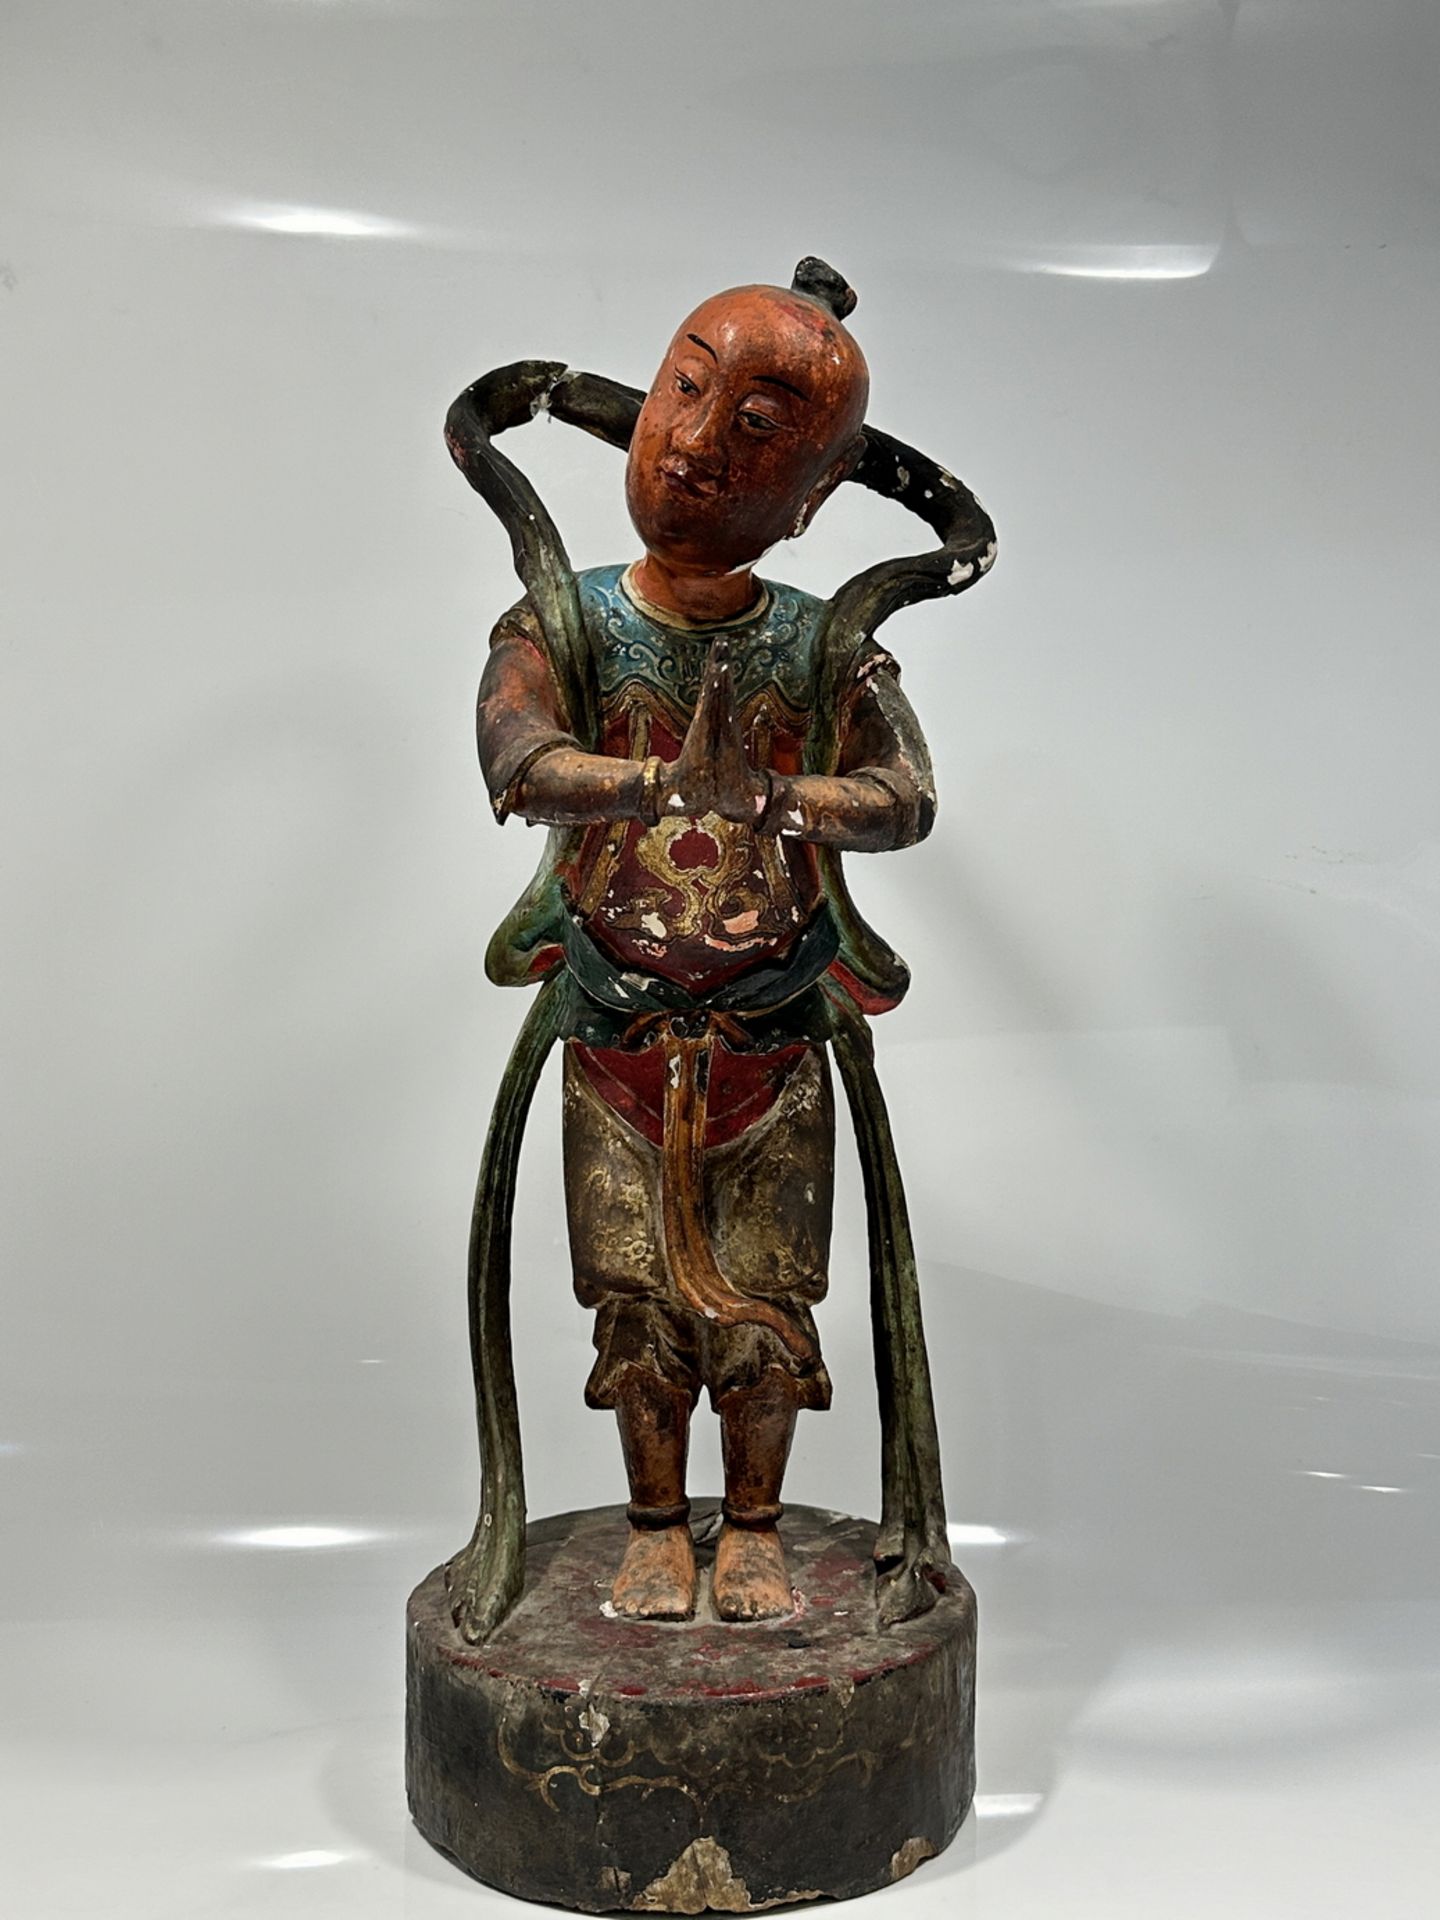 A Chinese wood sculpture, 14TH Century earlier Pr. Collection of NARA private gallary.